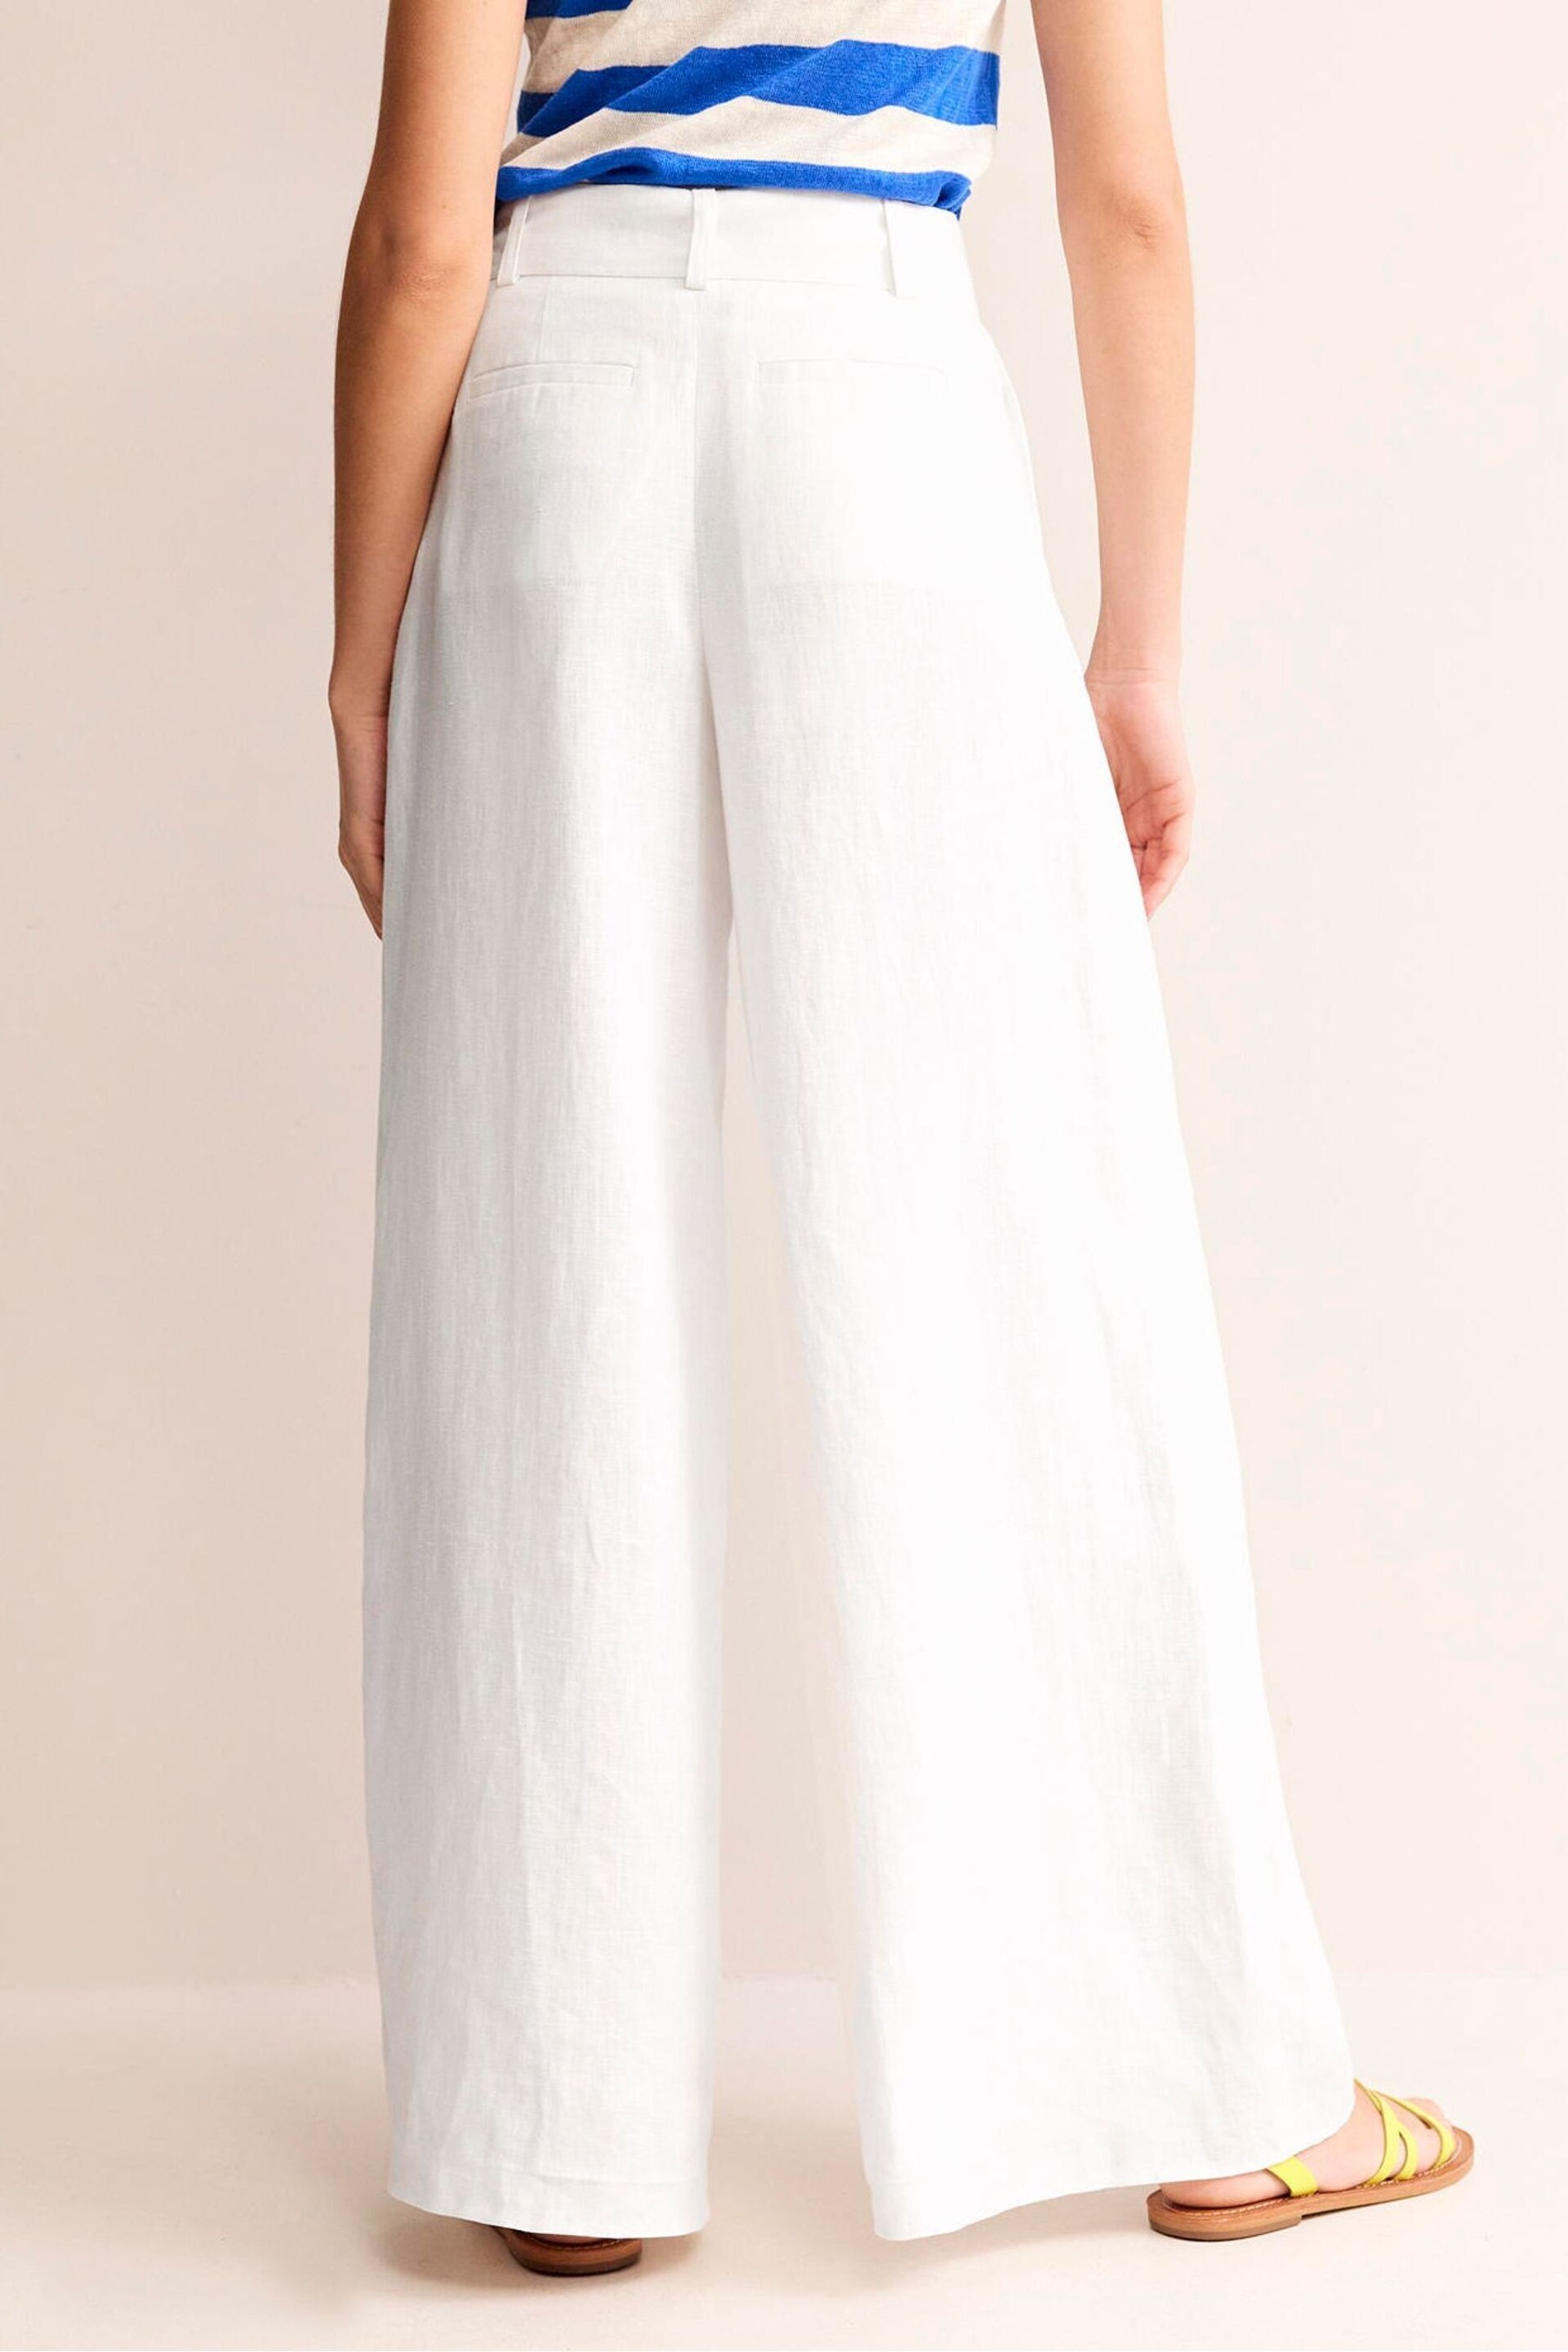 Boden White Palazzo Linen Trousers - Image 3 of 5